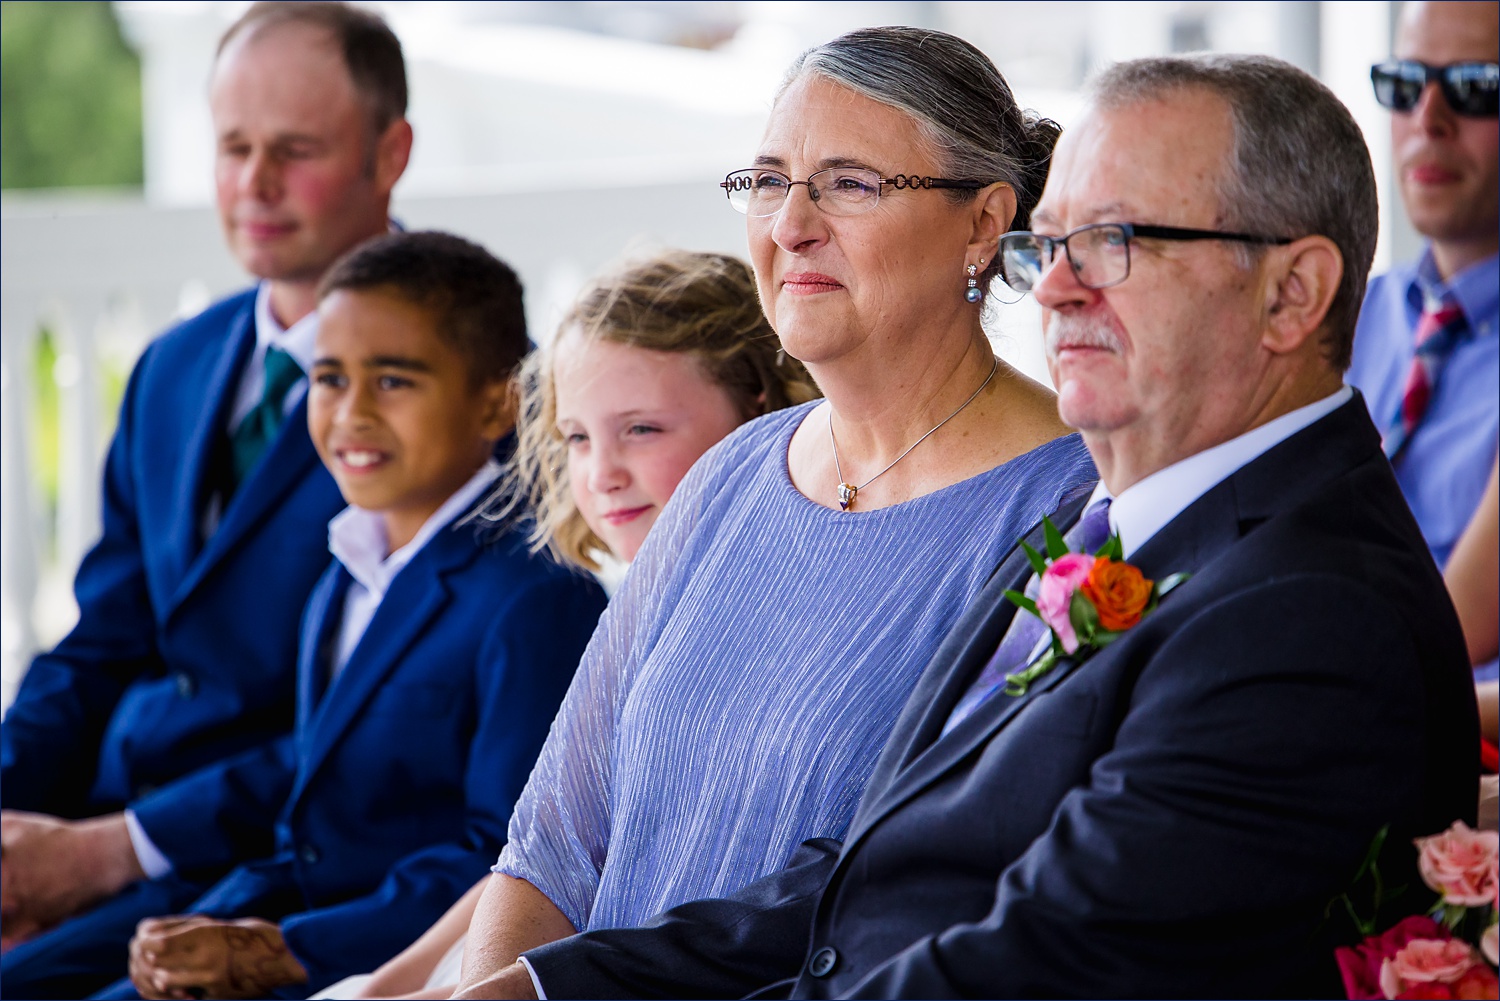 Family watches the wedding ceremony in New Hampshire